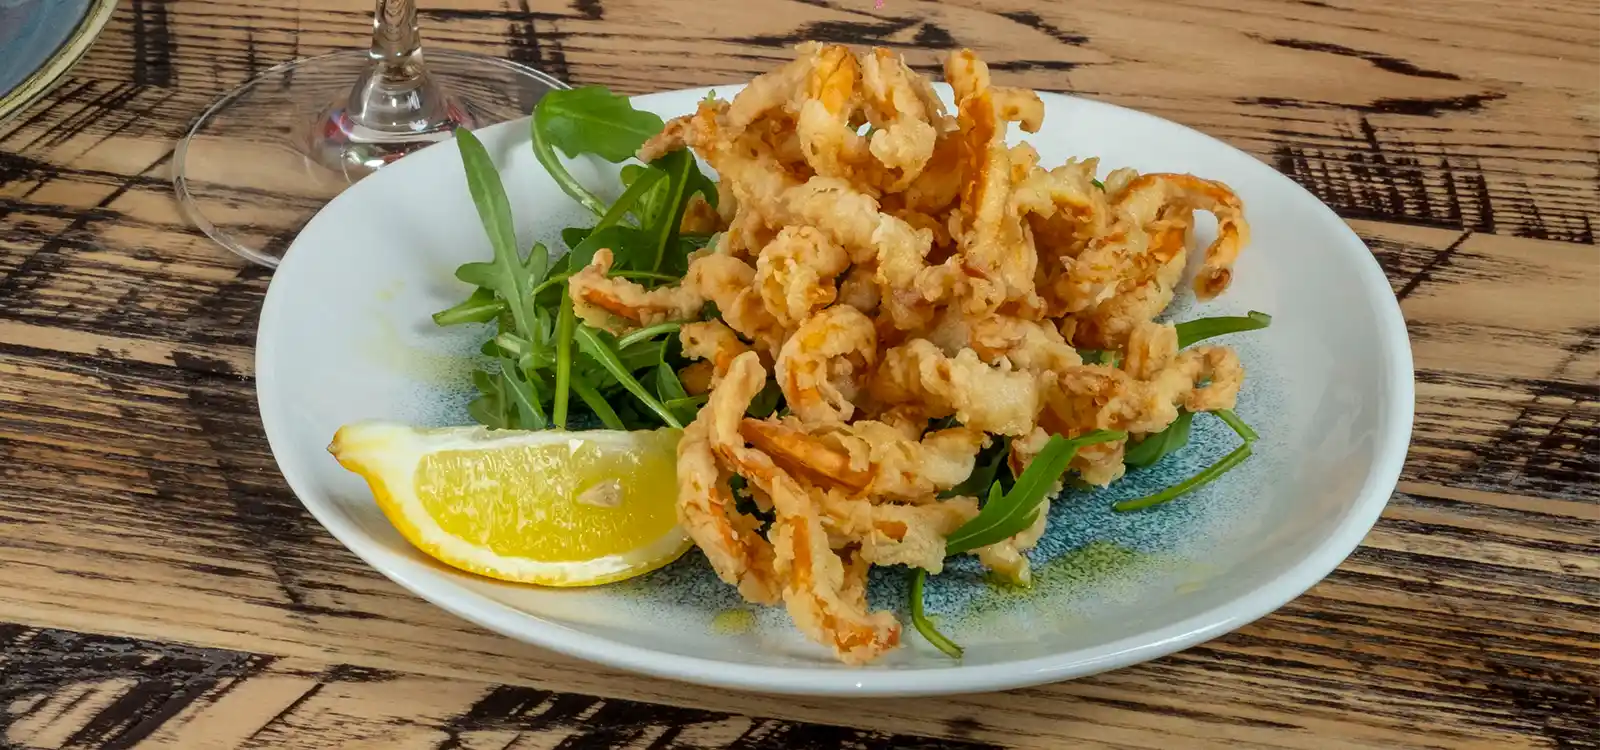 The Best Calamari in Manchester is the culinary term for squid. A slightly sweet, neutral-tasting seafood, calamari is often associated and used interchangeably with the dish “fried calamari,” which is made from the body of squid (and sometimes the tentacles) that is cut into rings, breaded, and deep fried. Occasionally, though, calamari can be sautéed or grilled.